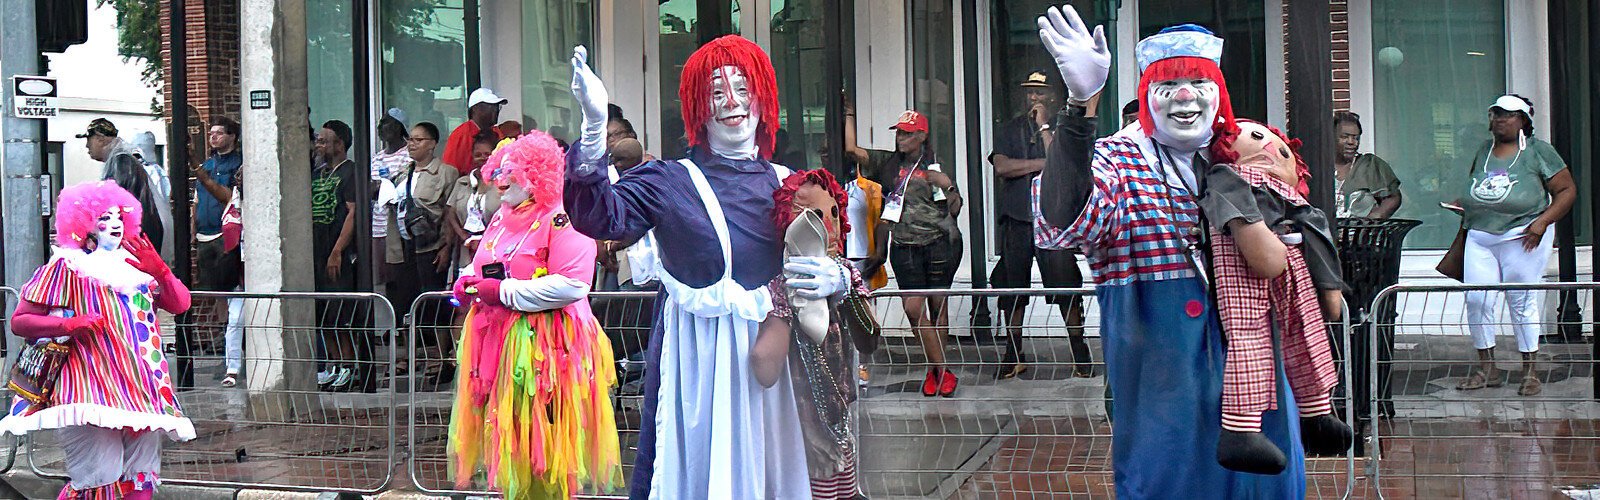 Clowns Raggedy Ann and Andy wave to the crowd as they entertain parade watchers along their route in Ybor City.